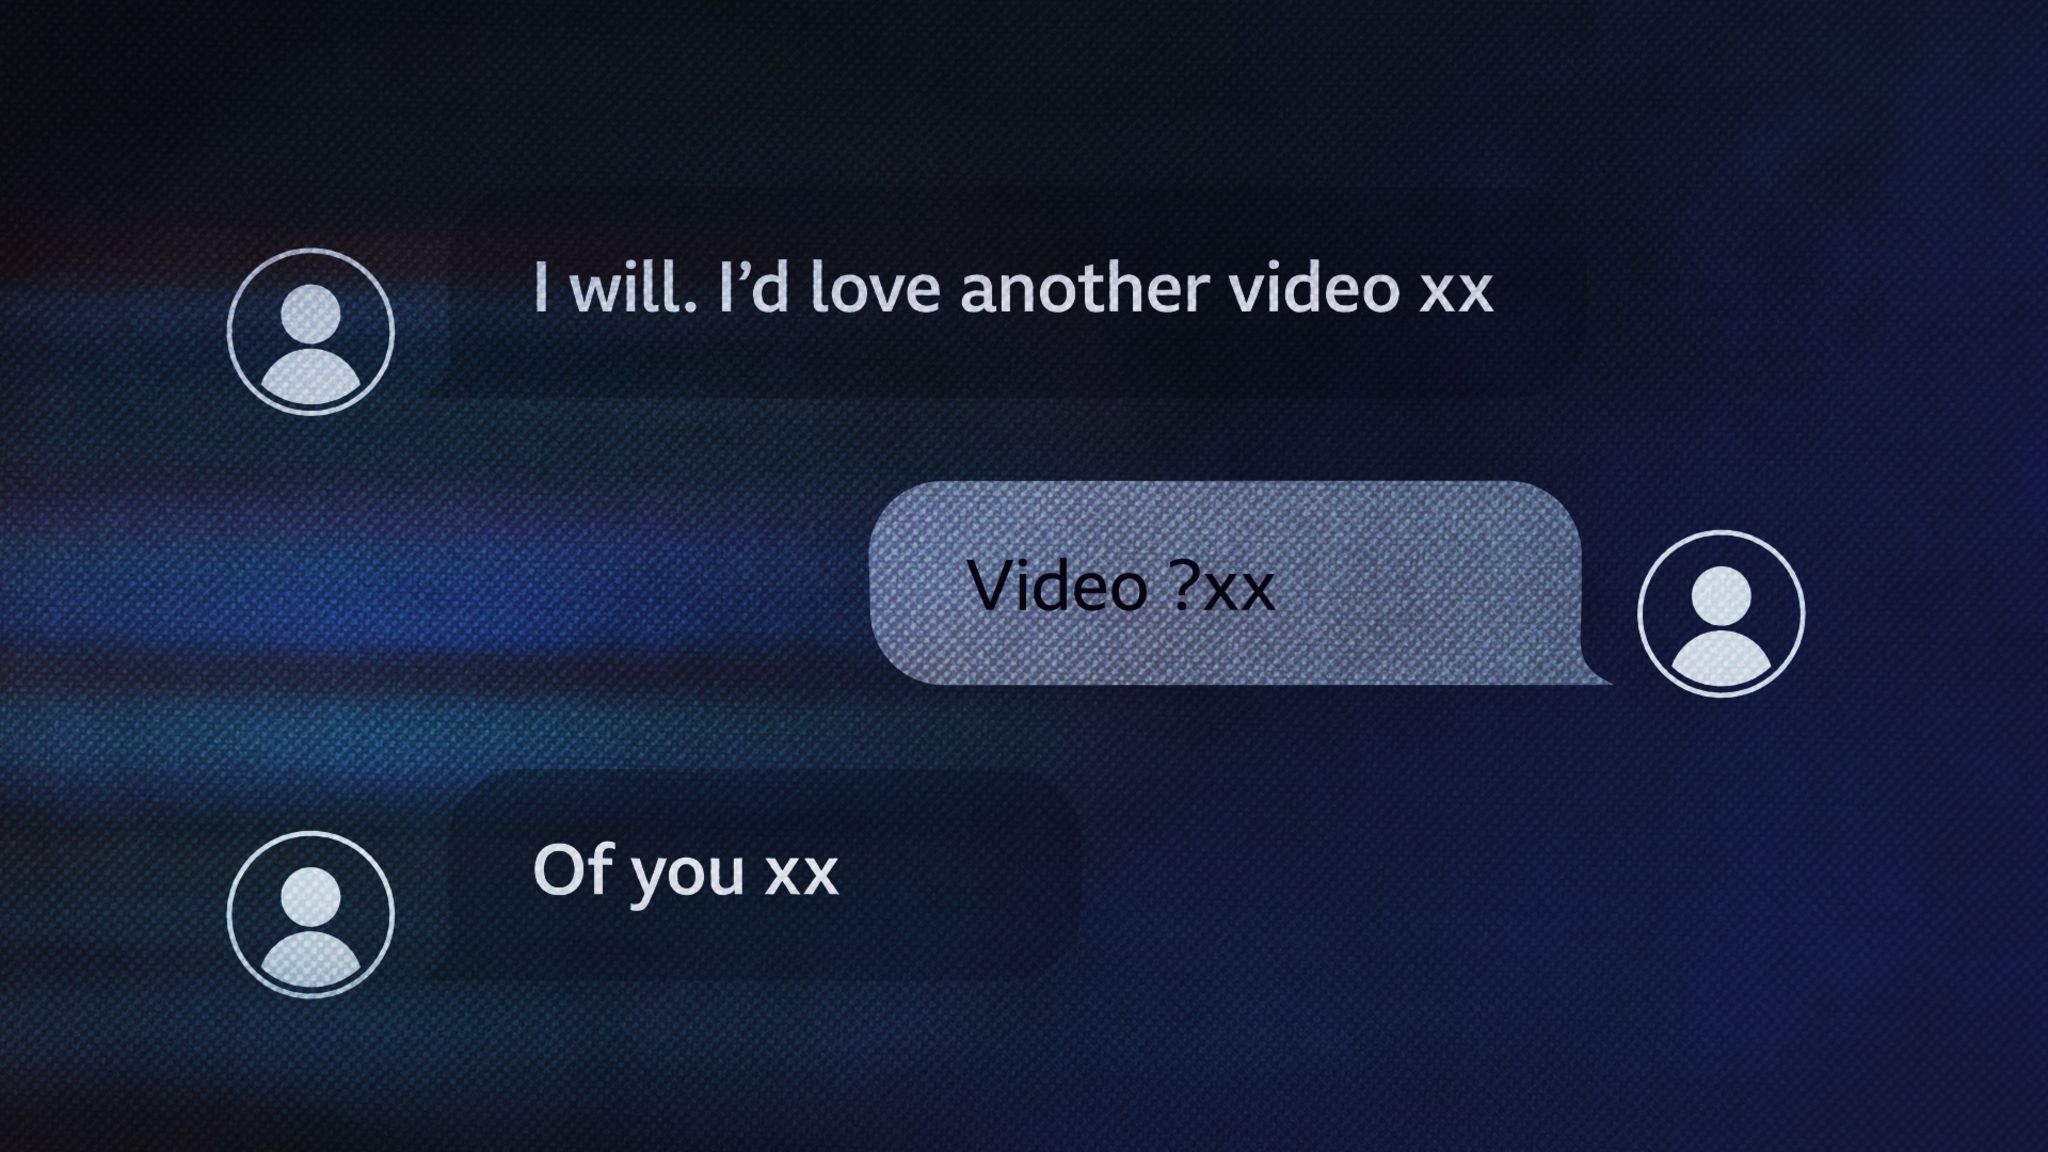 A police evidence photo of a phone with a message exchange between Neil Foden and Child A, which reads: "I'd love another video xx", to which the girl replies: "video? xx". Neil Foden replies: "Of you xx"